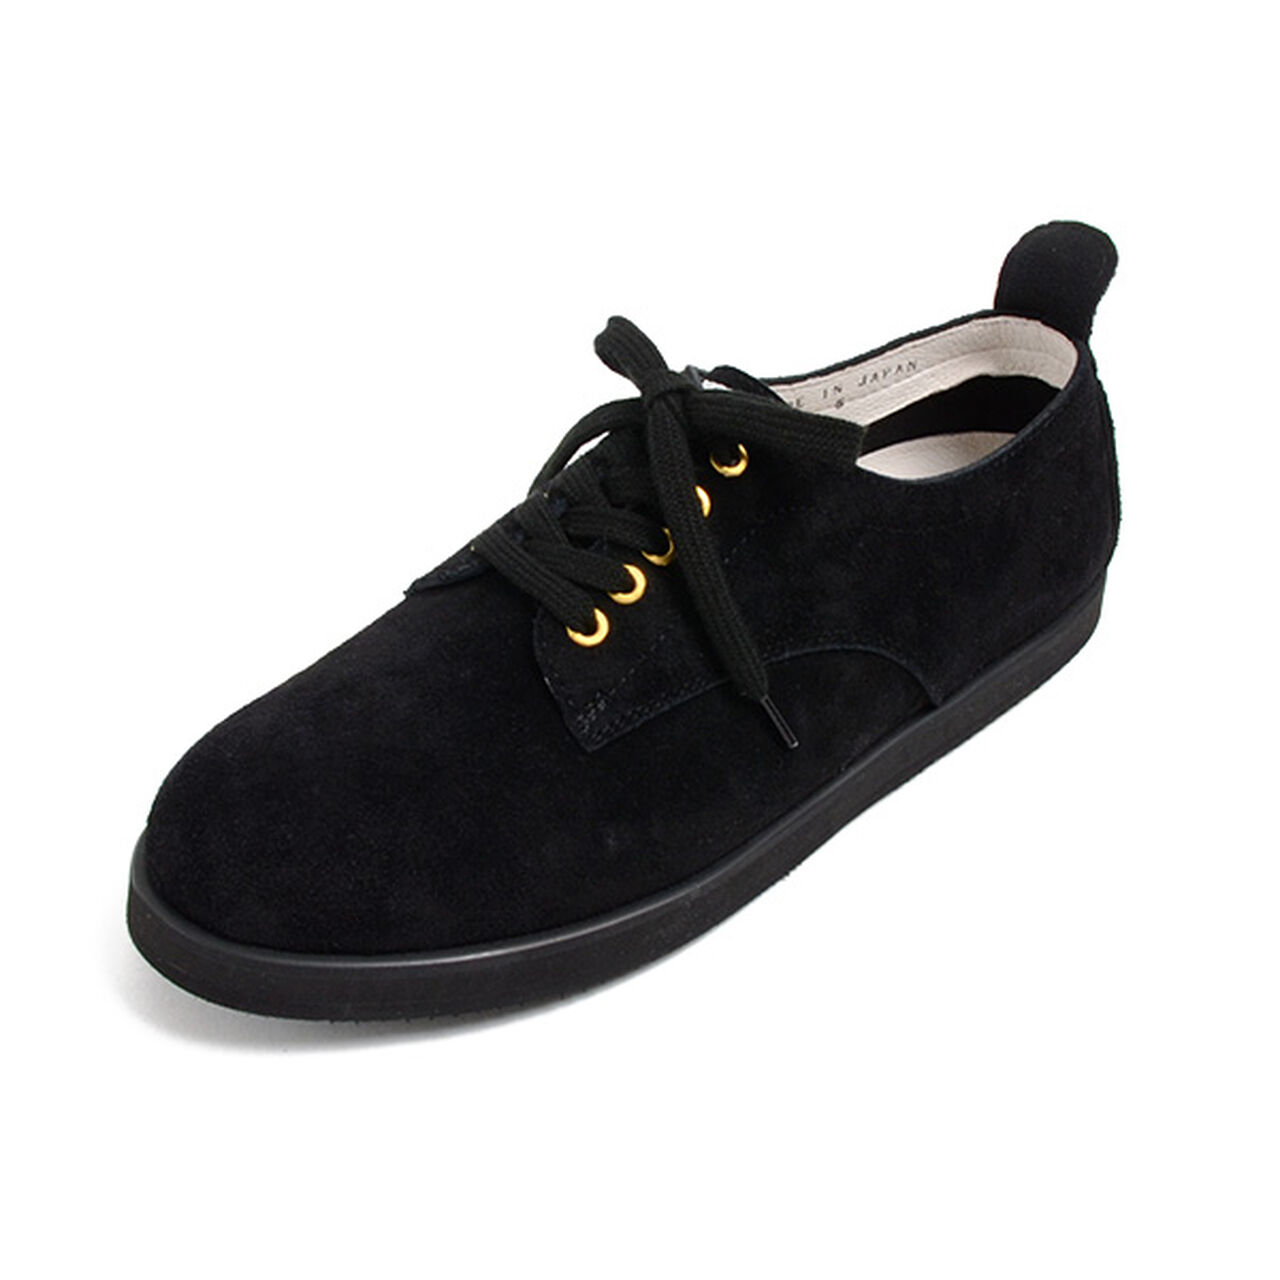 Riesel / Suede Leather Shoes,Black, large image number 0